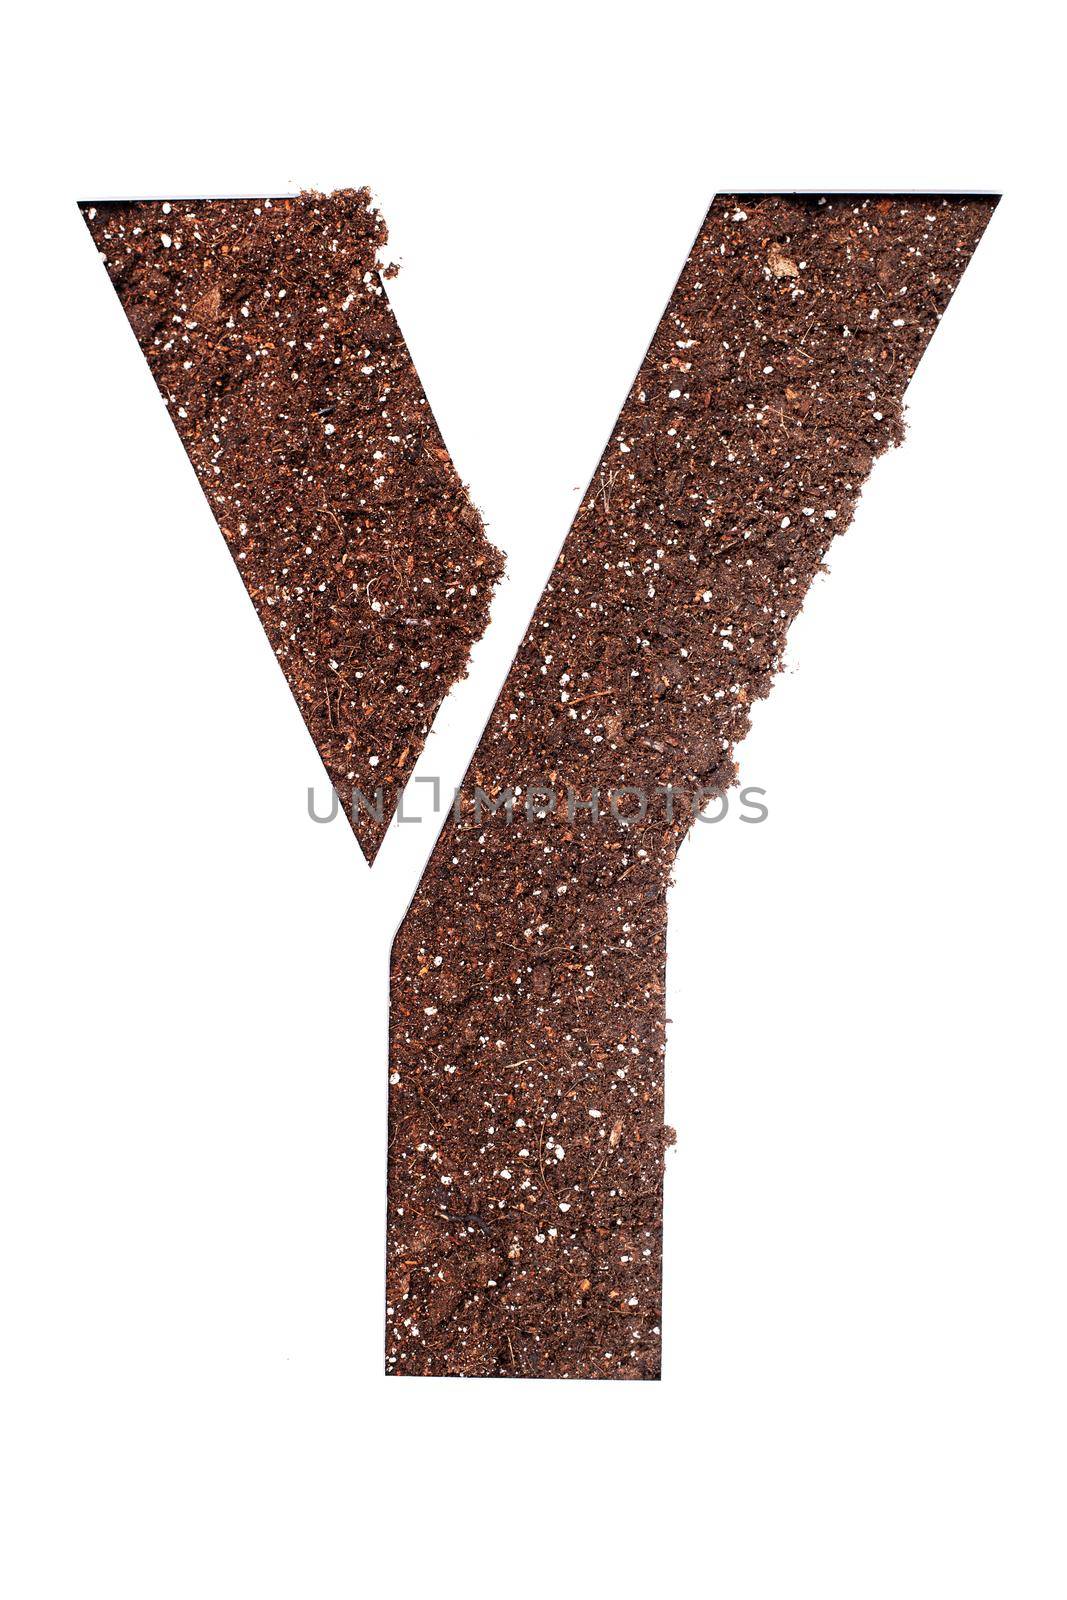 stencil letter Y made above dirt on white surface by kokimk